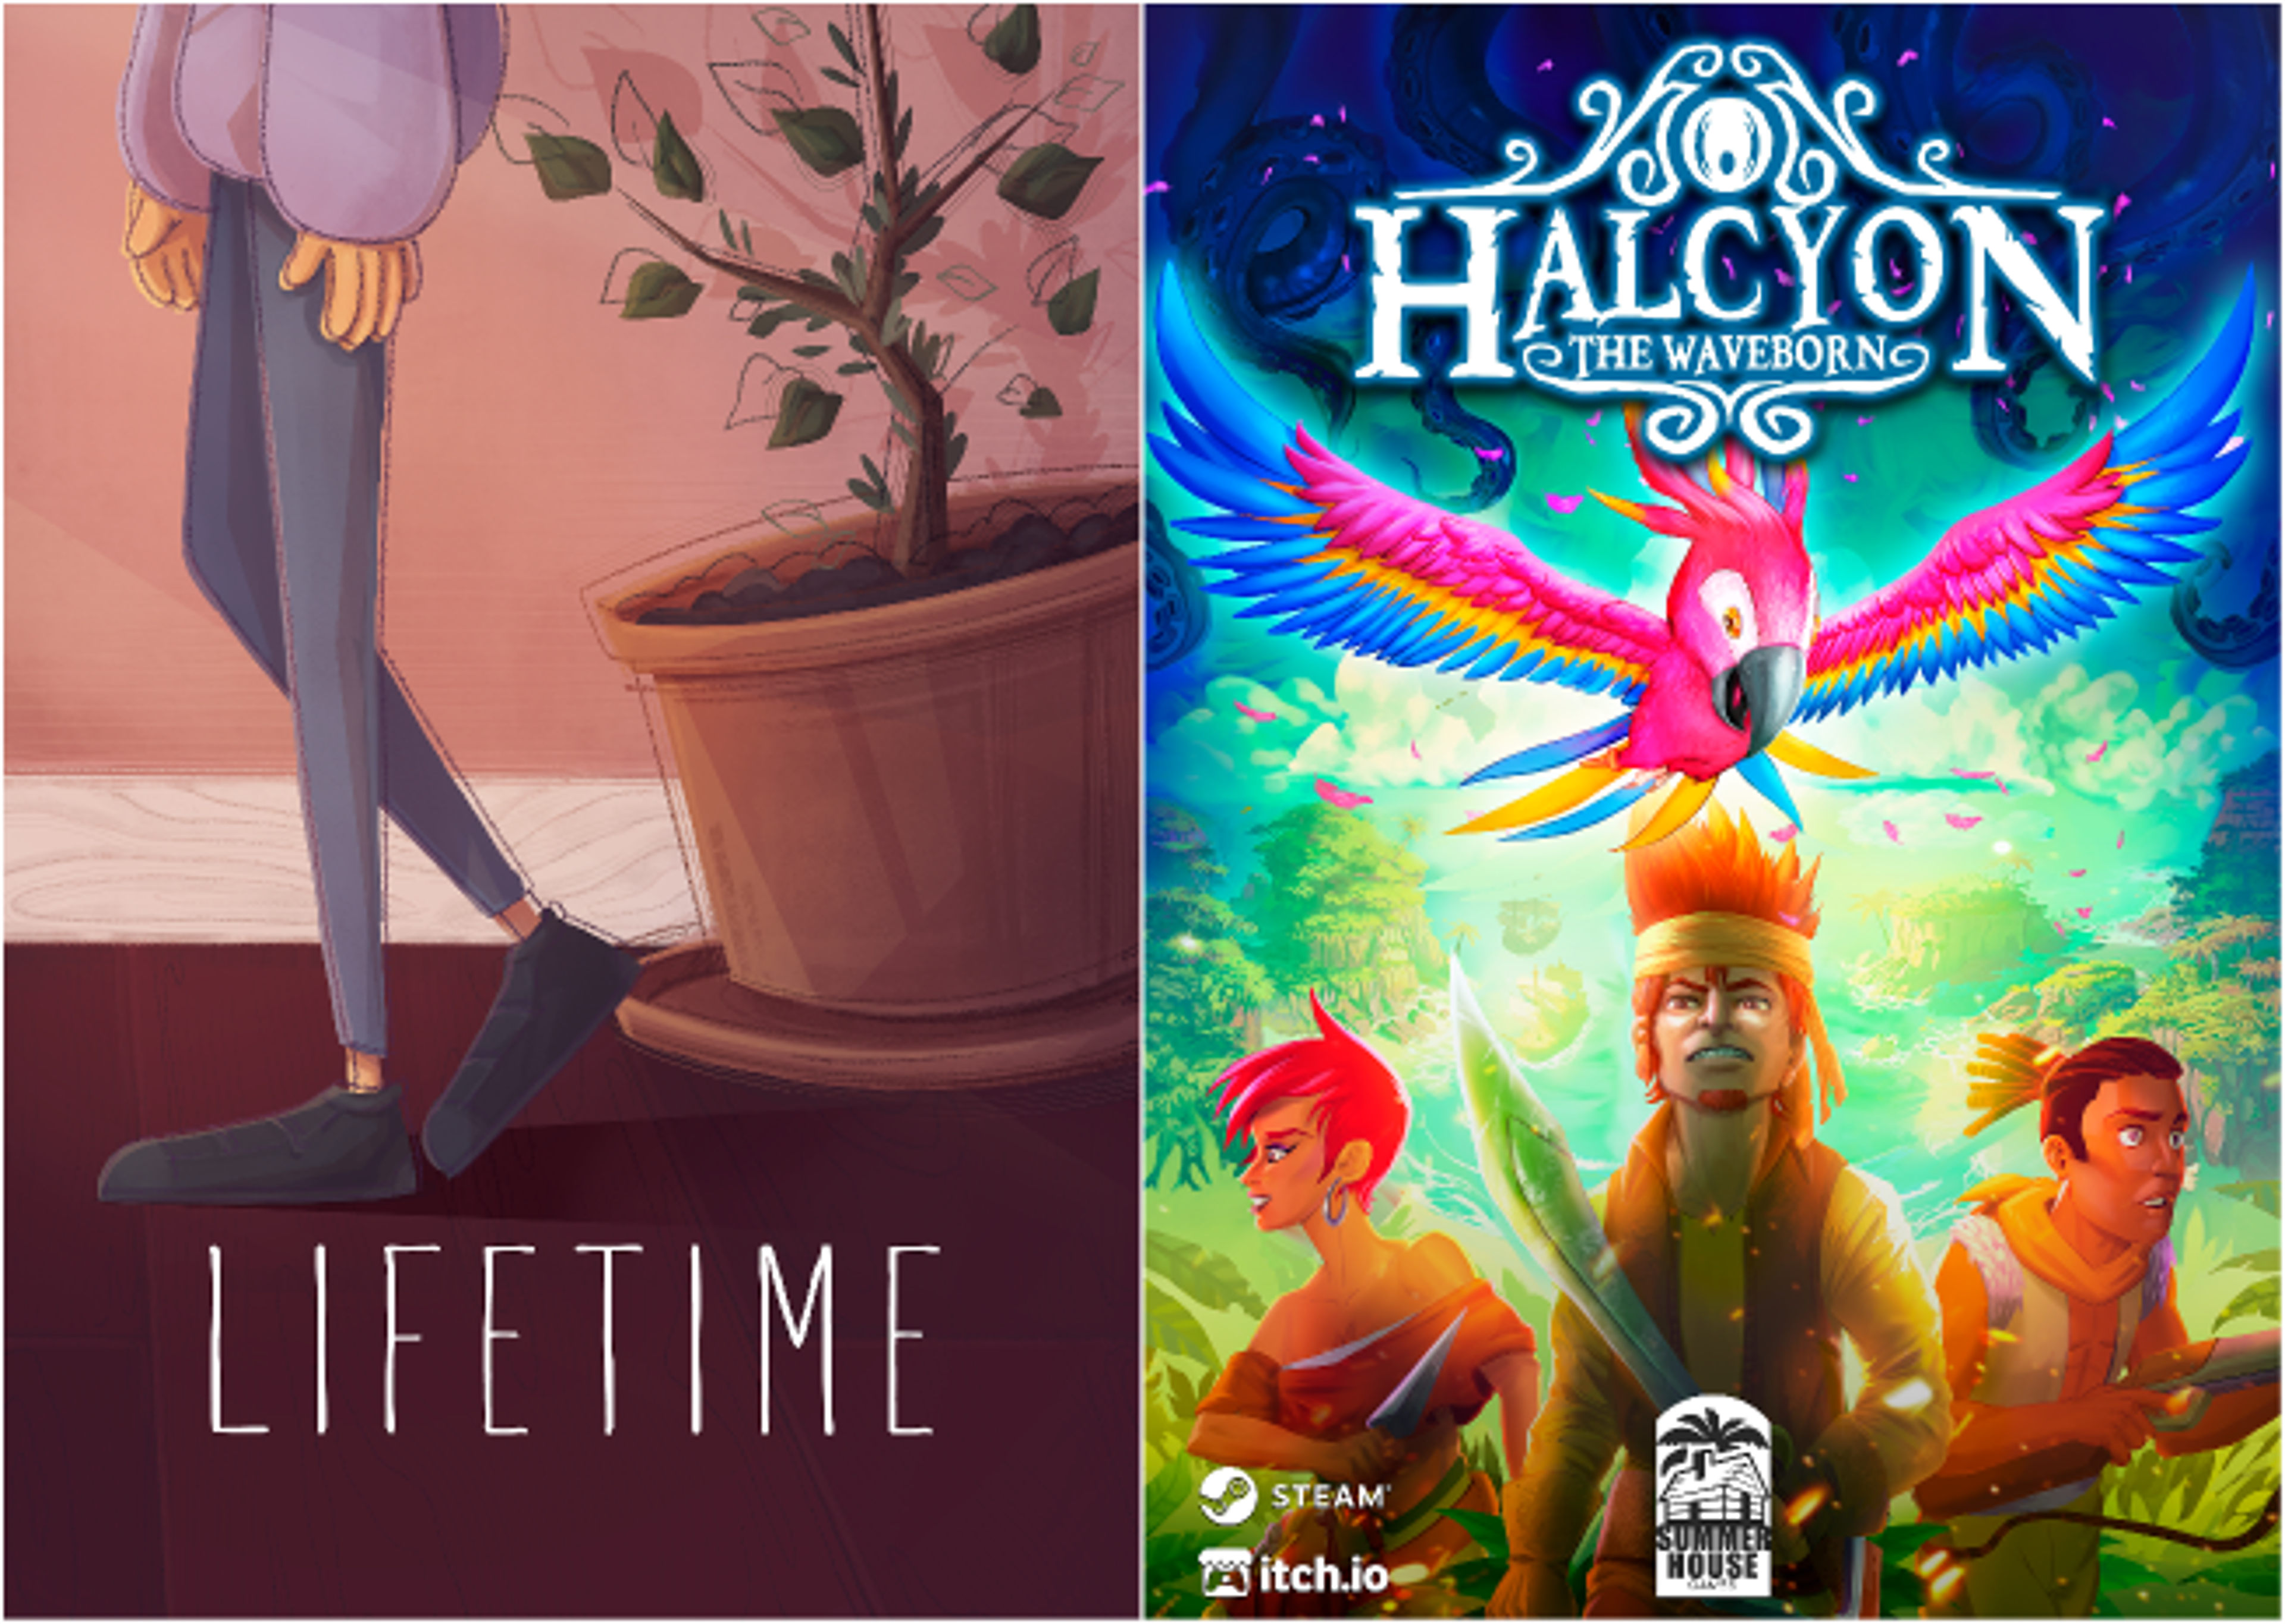 A split-image poster; on the left, a subtle depiction of a person's lower half next to a potted plant, titled "LIFETIME", on the right, a vibrant game advertisement for "HALCYON THE WAYBORN" with a central character and a colorful bird.